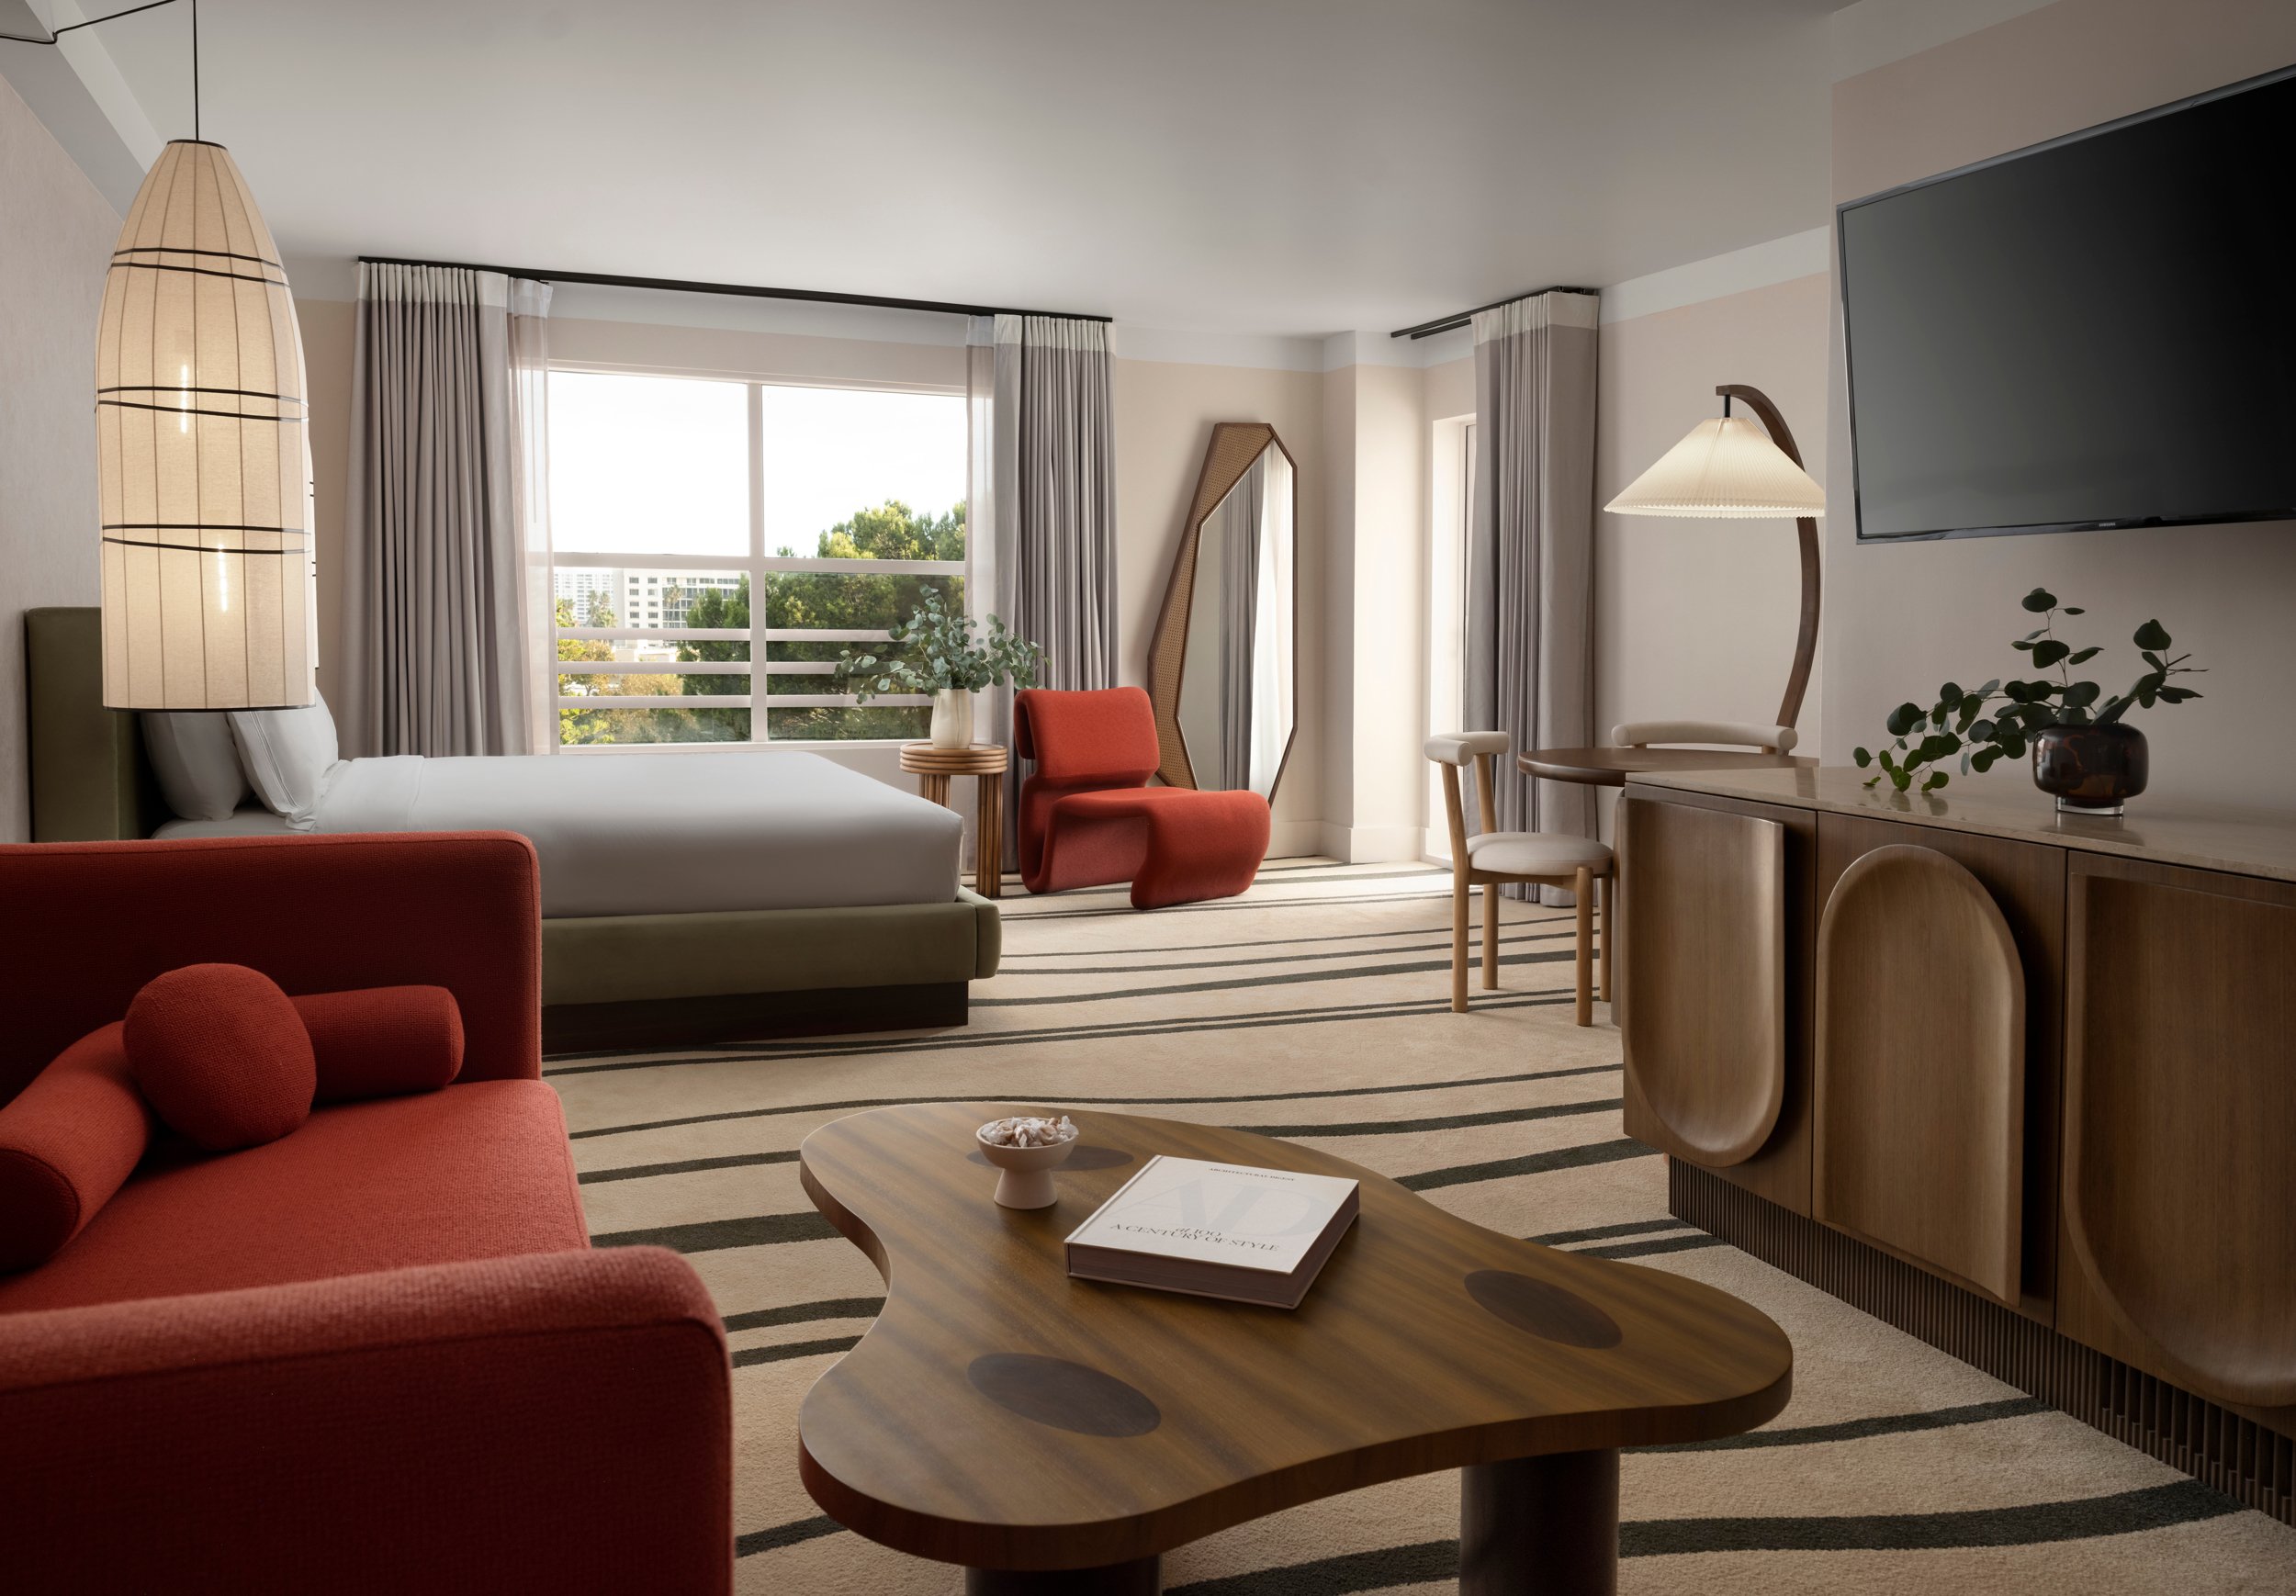 A look at the classic king room at the Sandbourne Santa Monica